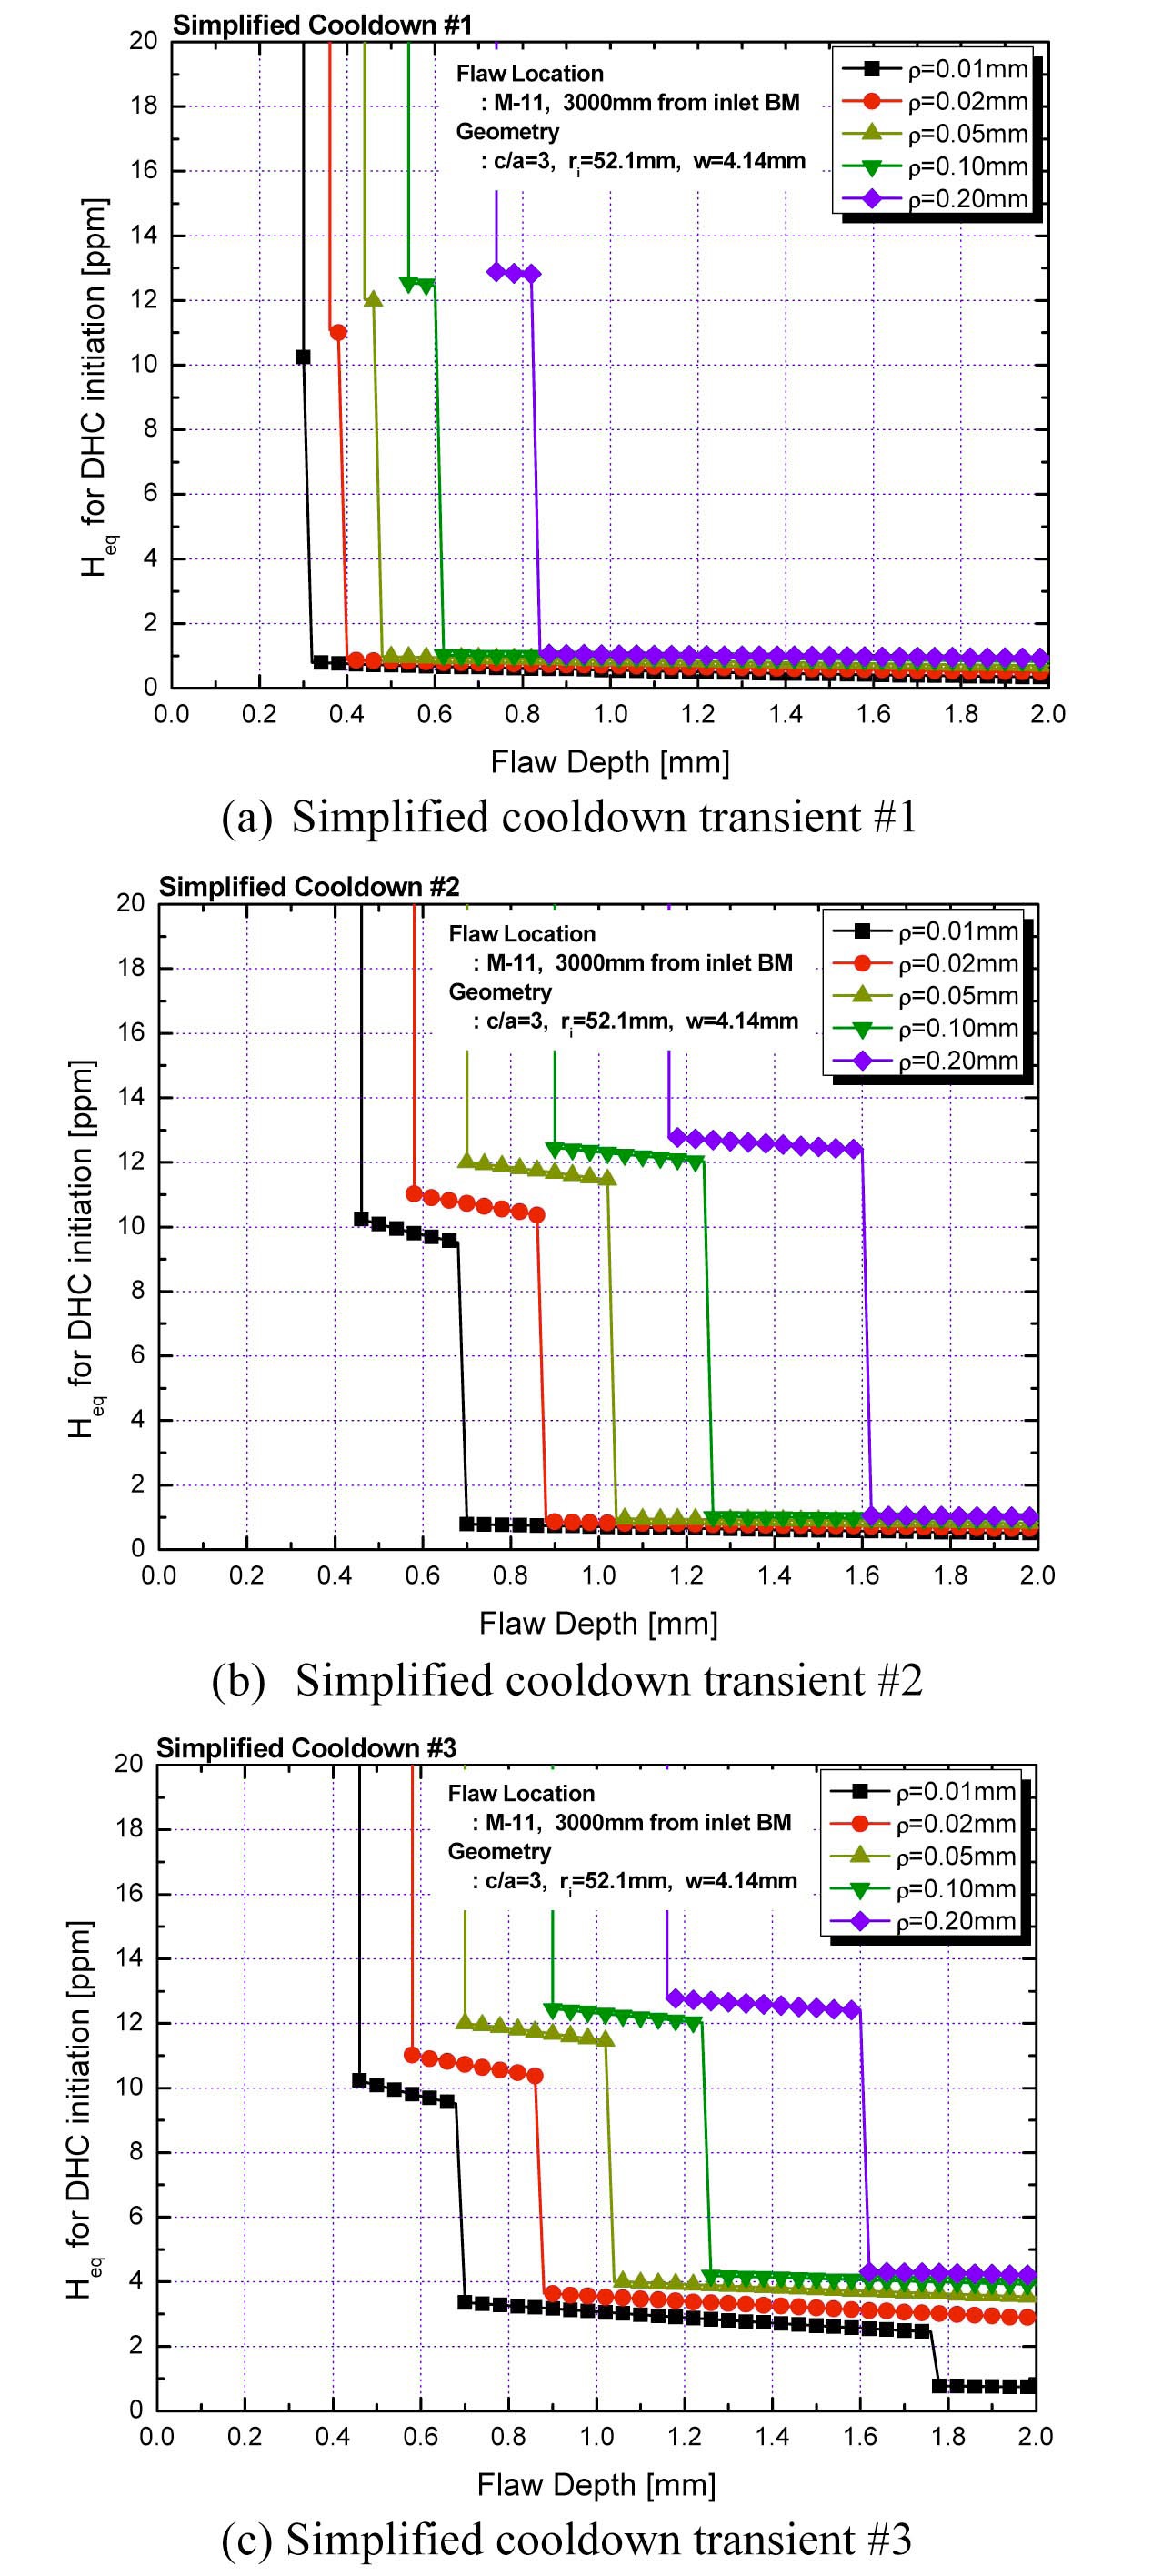 Threshold Bulk Heq for DHC Initiation under Simplified Cooldown Transients